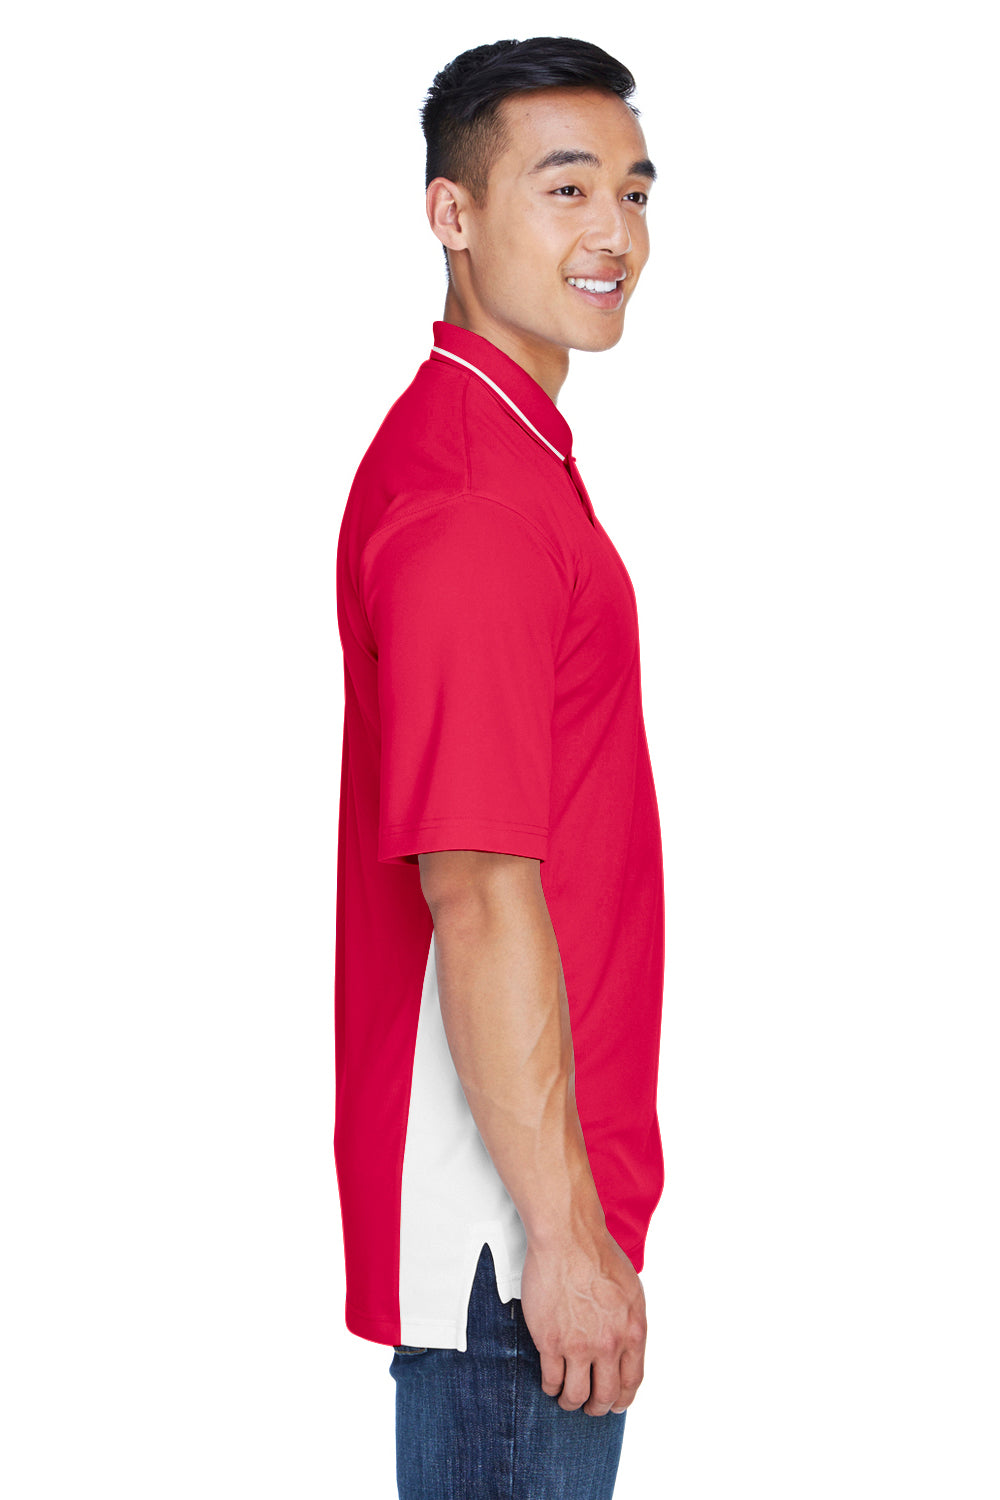 UltraClub 8406 Mens Cool & Dry Moisture Wicking Short Sleeve Polo Shirt Red/White Side